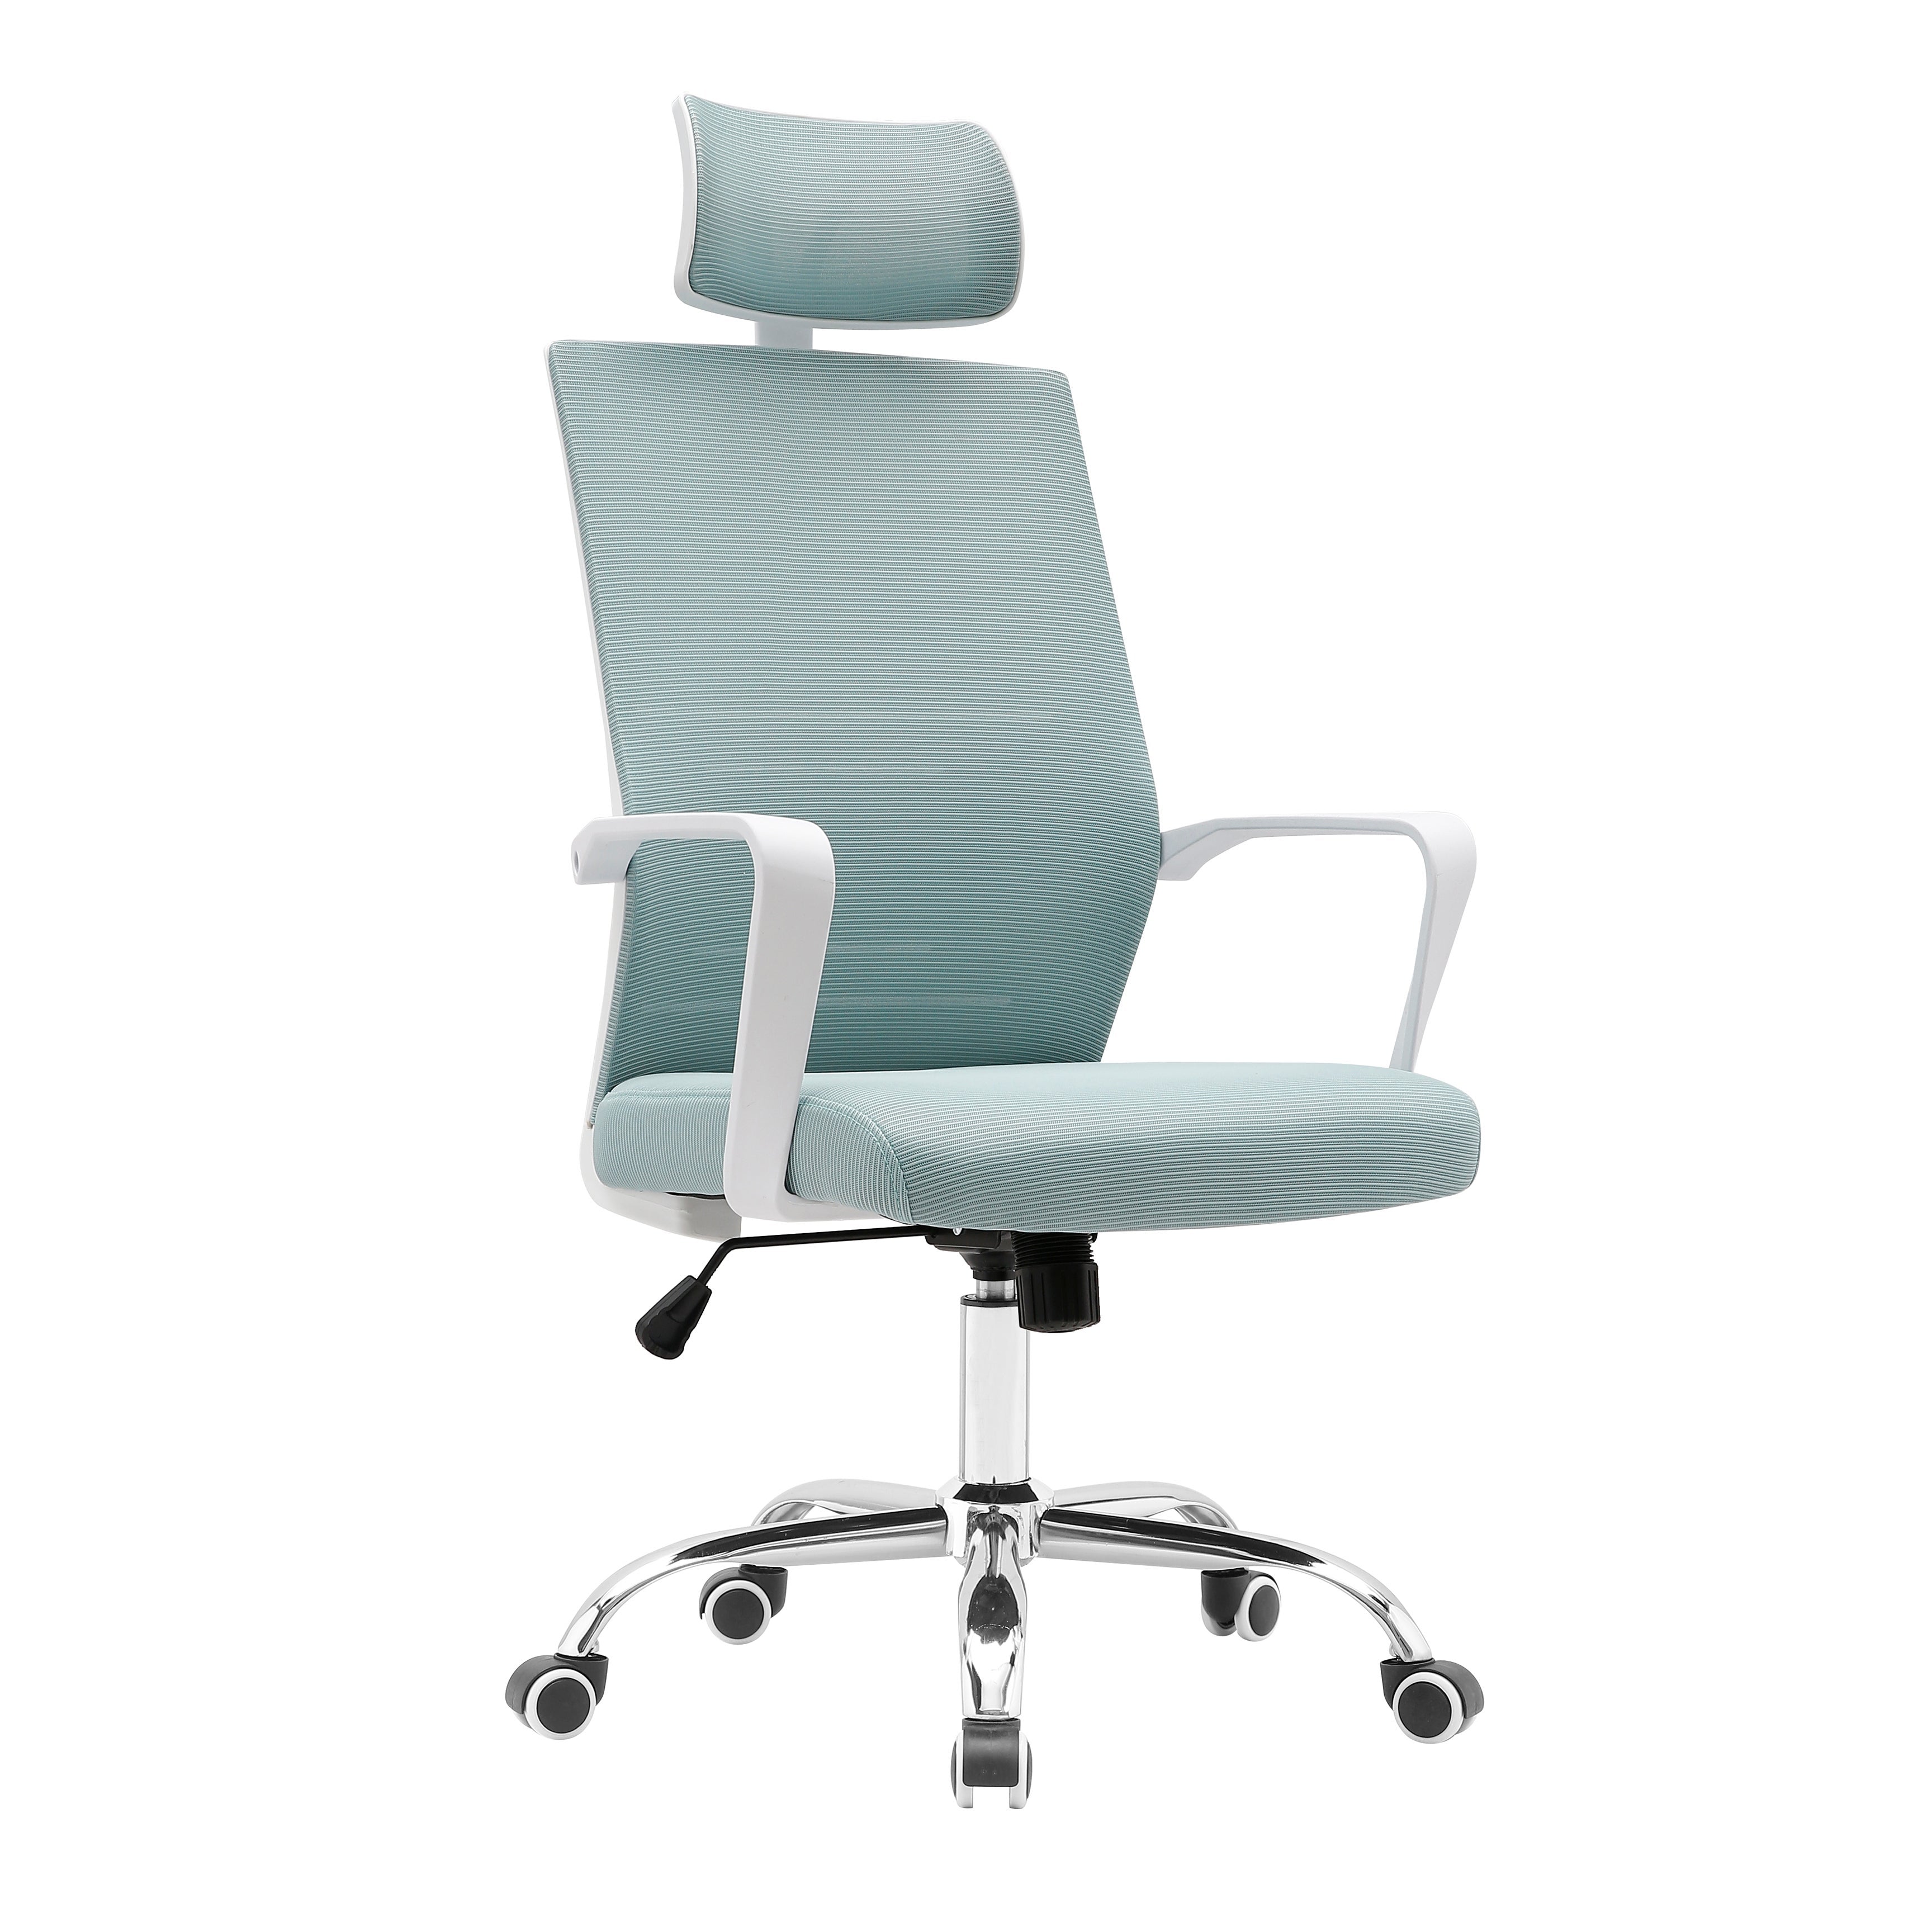 Porthos Home Heath Swivel Office Chair, Mesh Back With Head Support TTR528